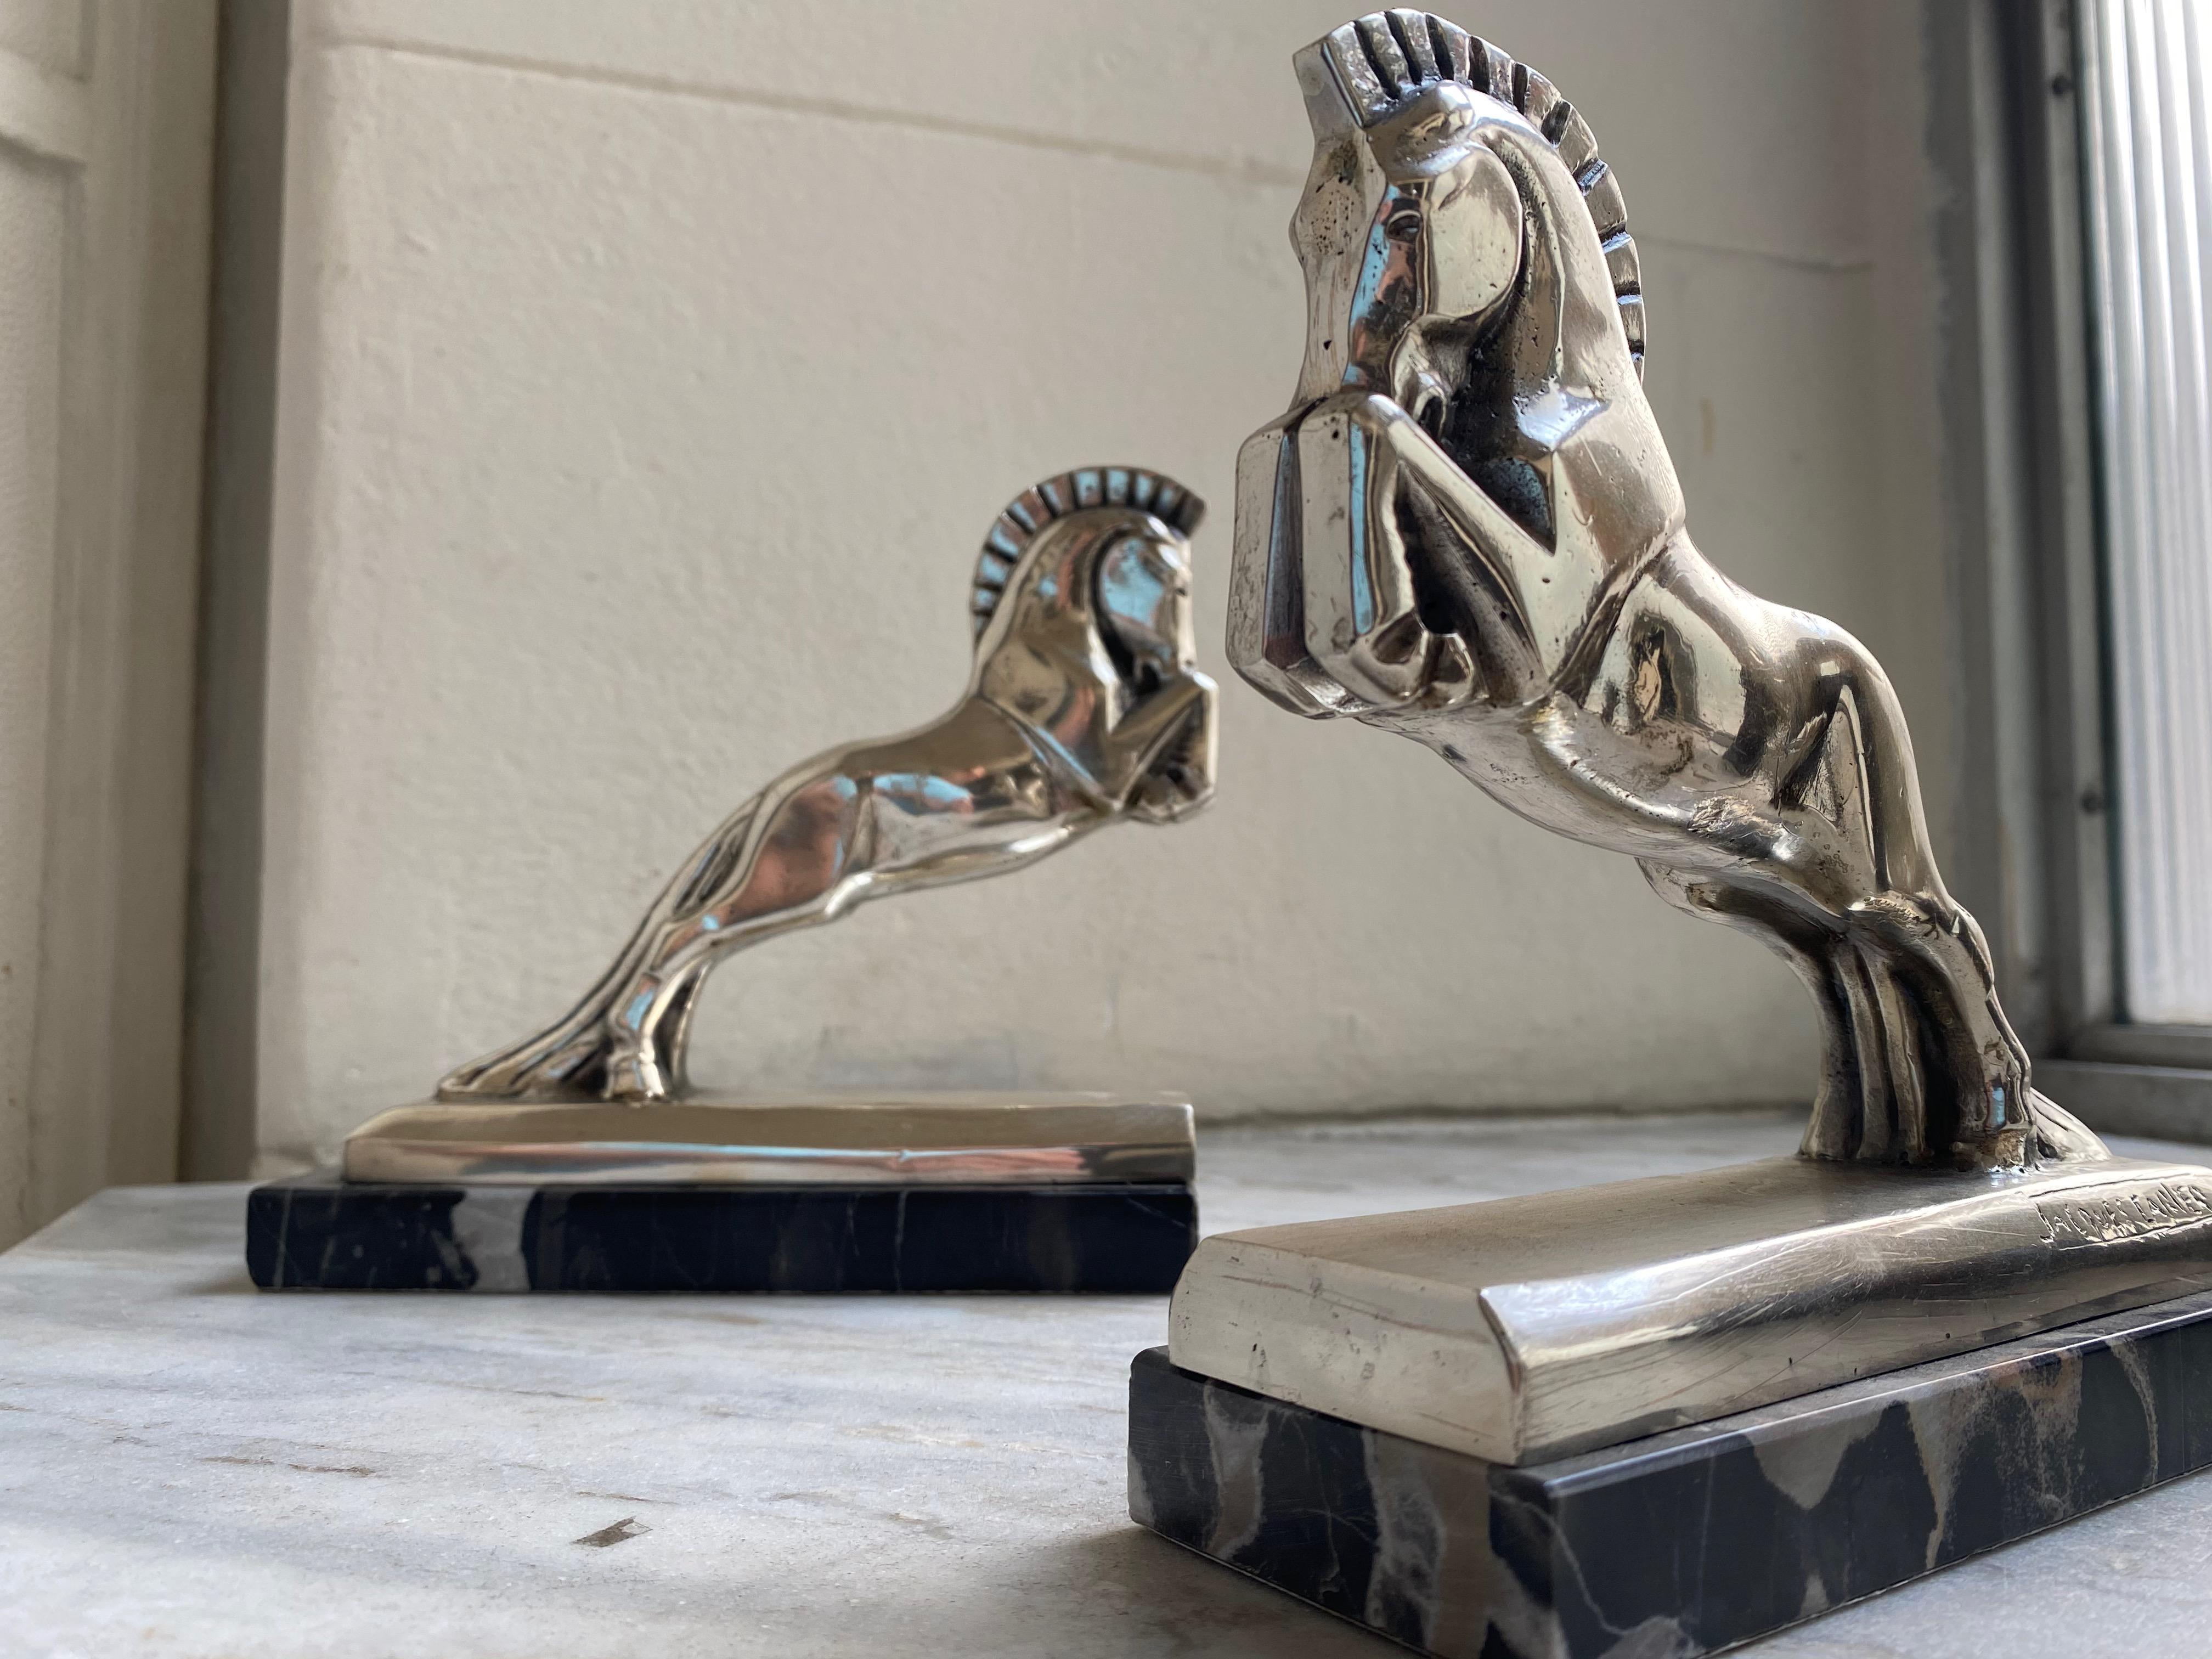 Silvered plated bronze Art Deco horse bookends by Jacques Cartier (French, 1907-2001). Both signed Jacques Cartier in lower area and both on a black marble base. Made in France, circa 1930. Cubist sculpture of an equestrian horse with bold mane.